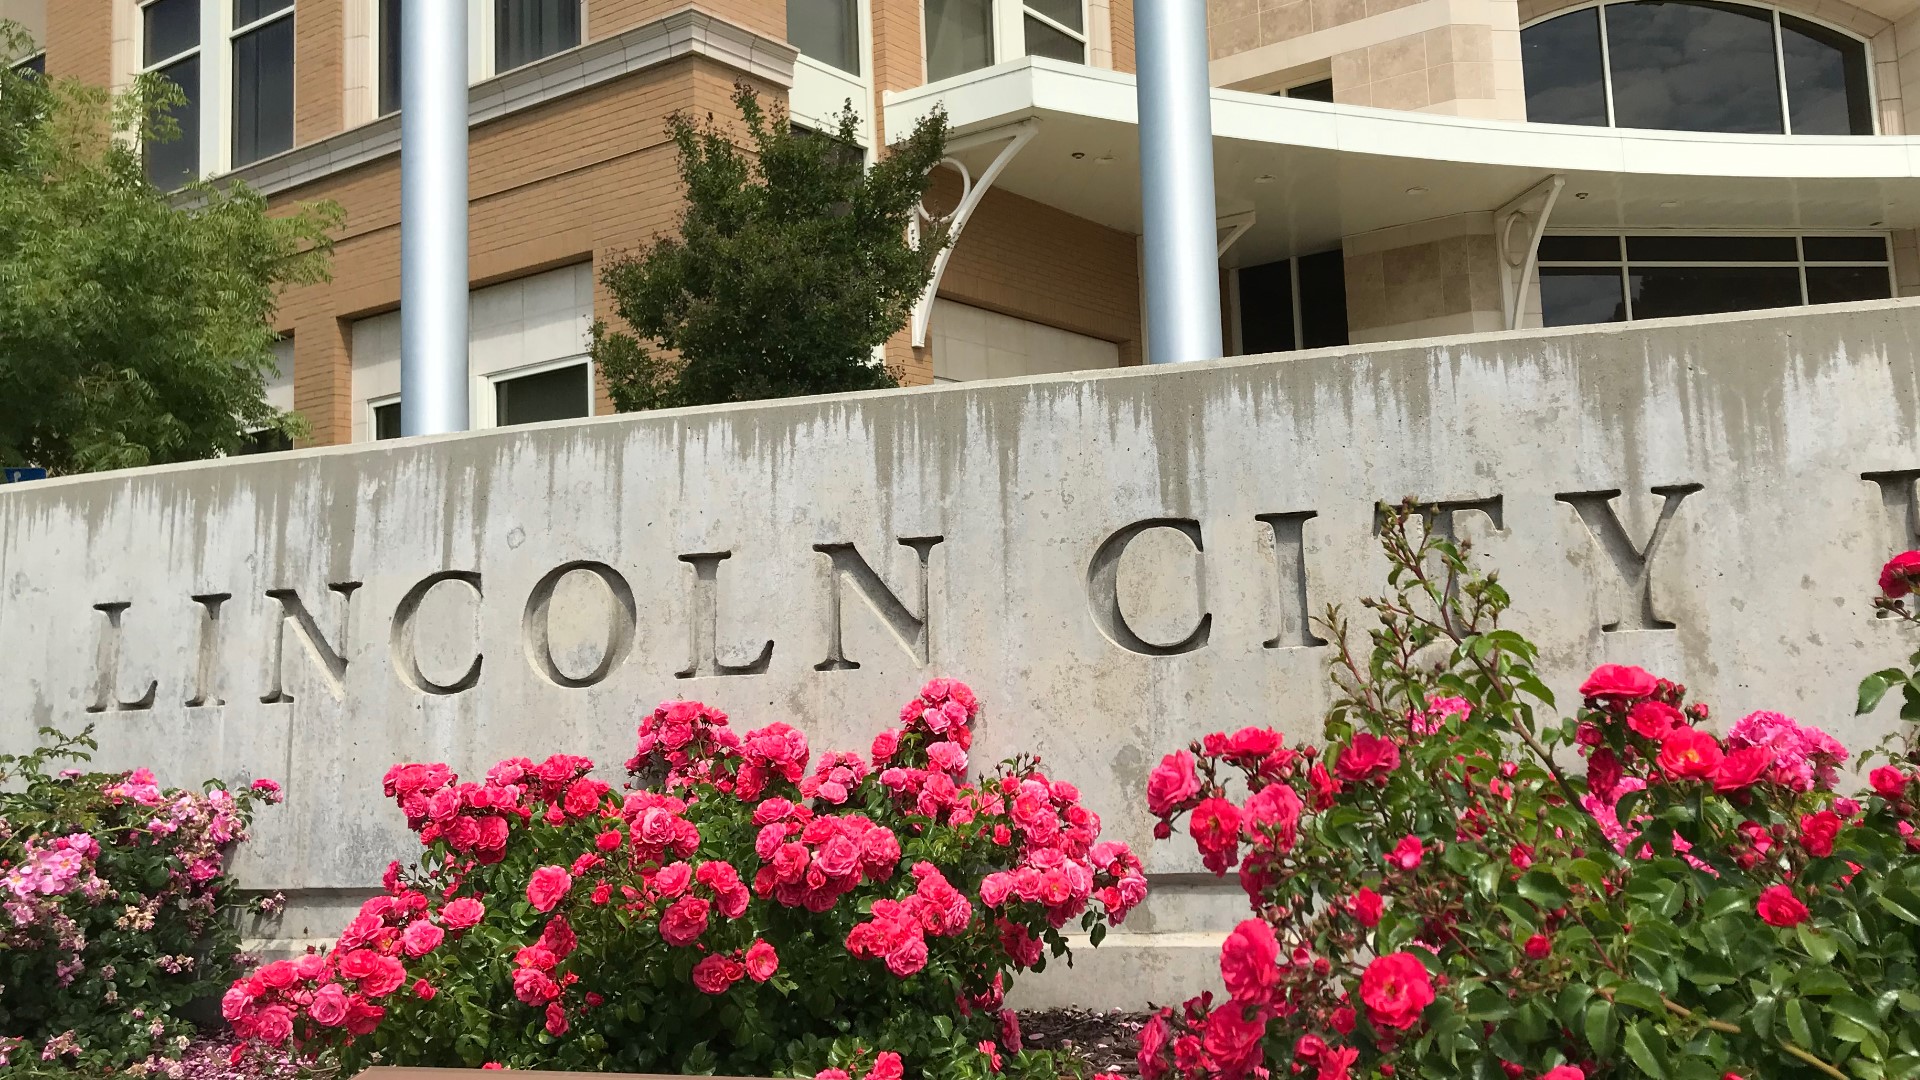 A Placer County Grand Jury released a report on “City of Lincoln Water Connection Fund” finding fees were improperly collected to the tune of $40+ million and funds were mismanaged.